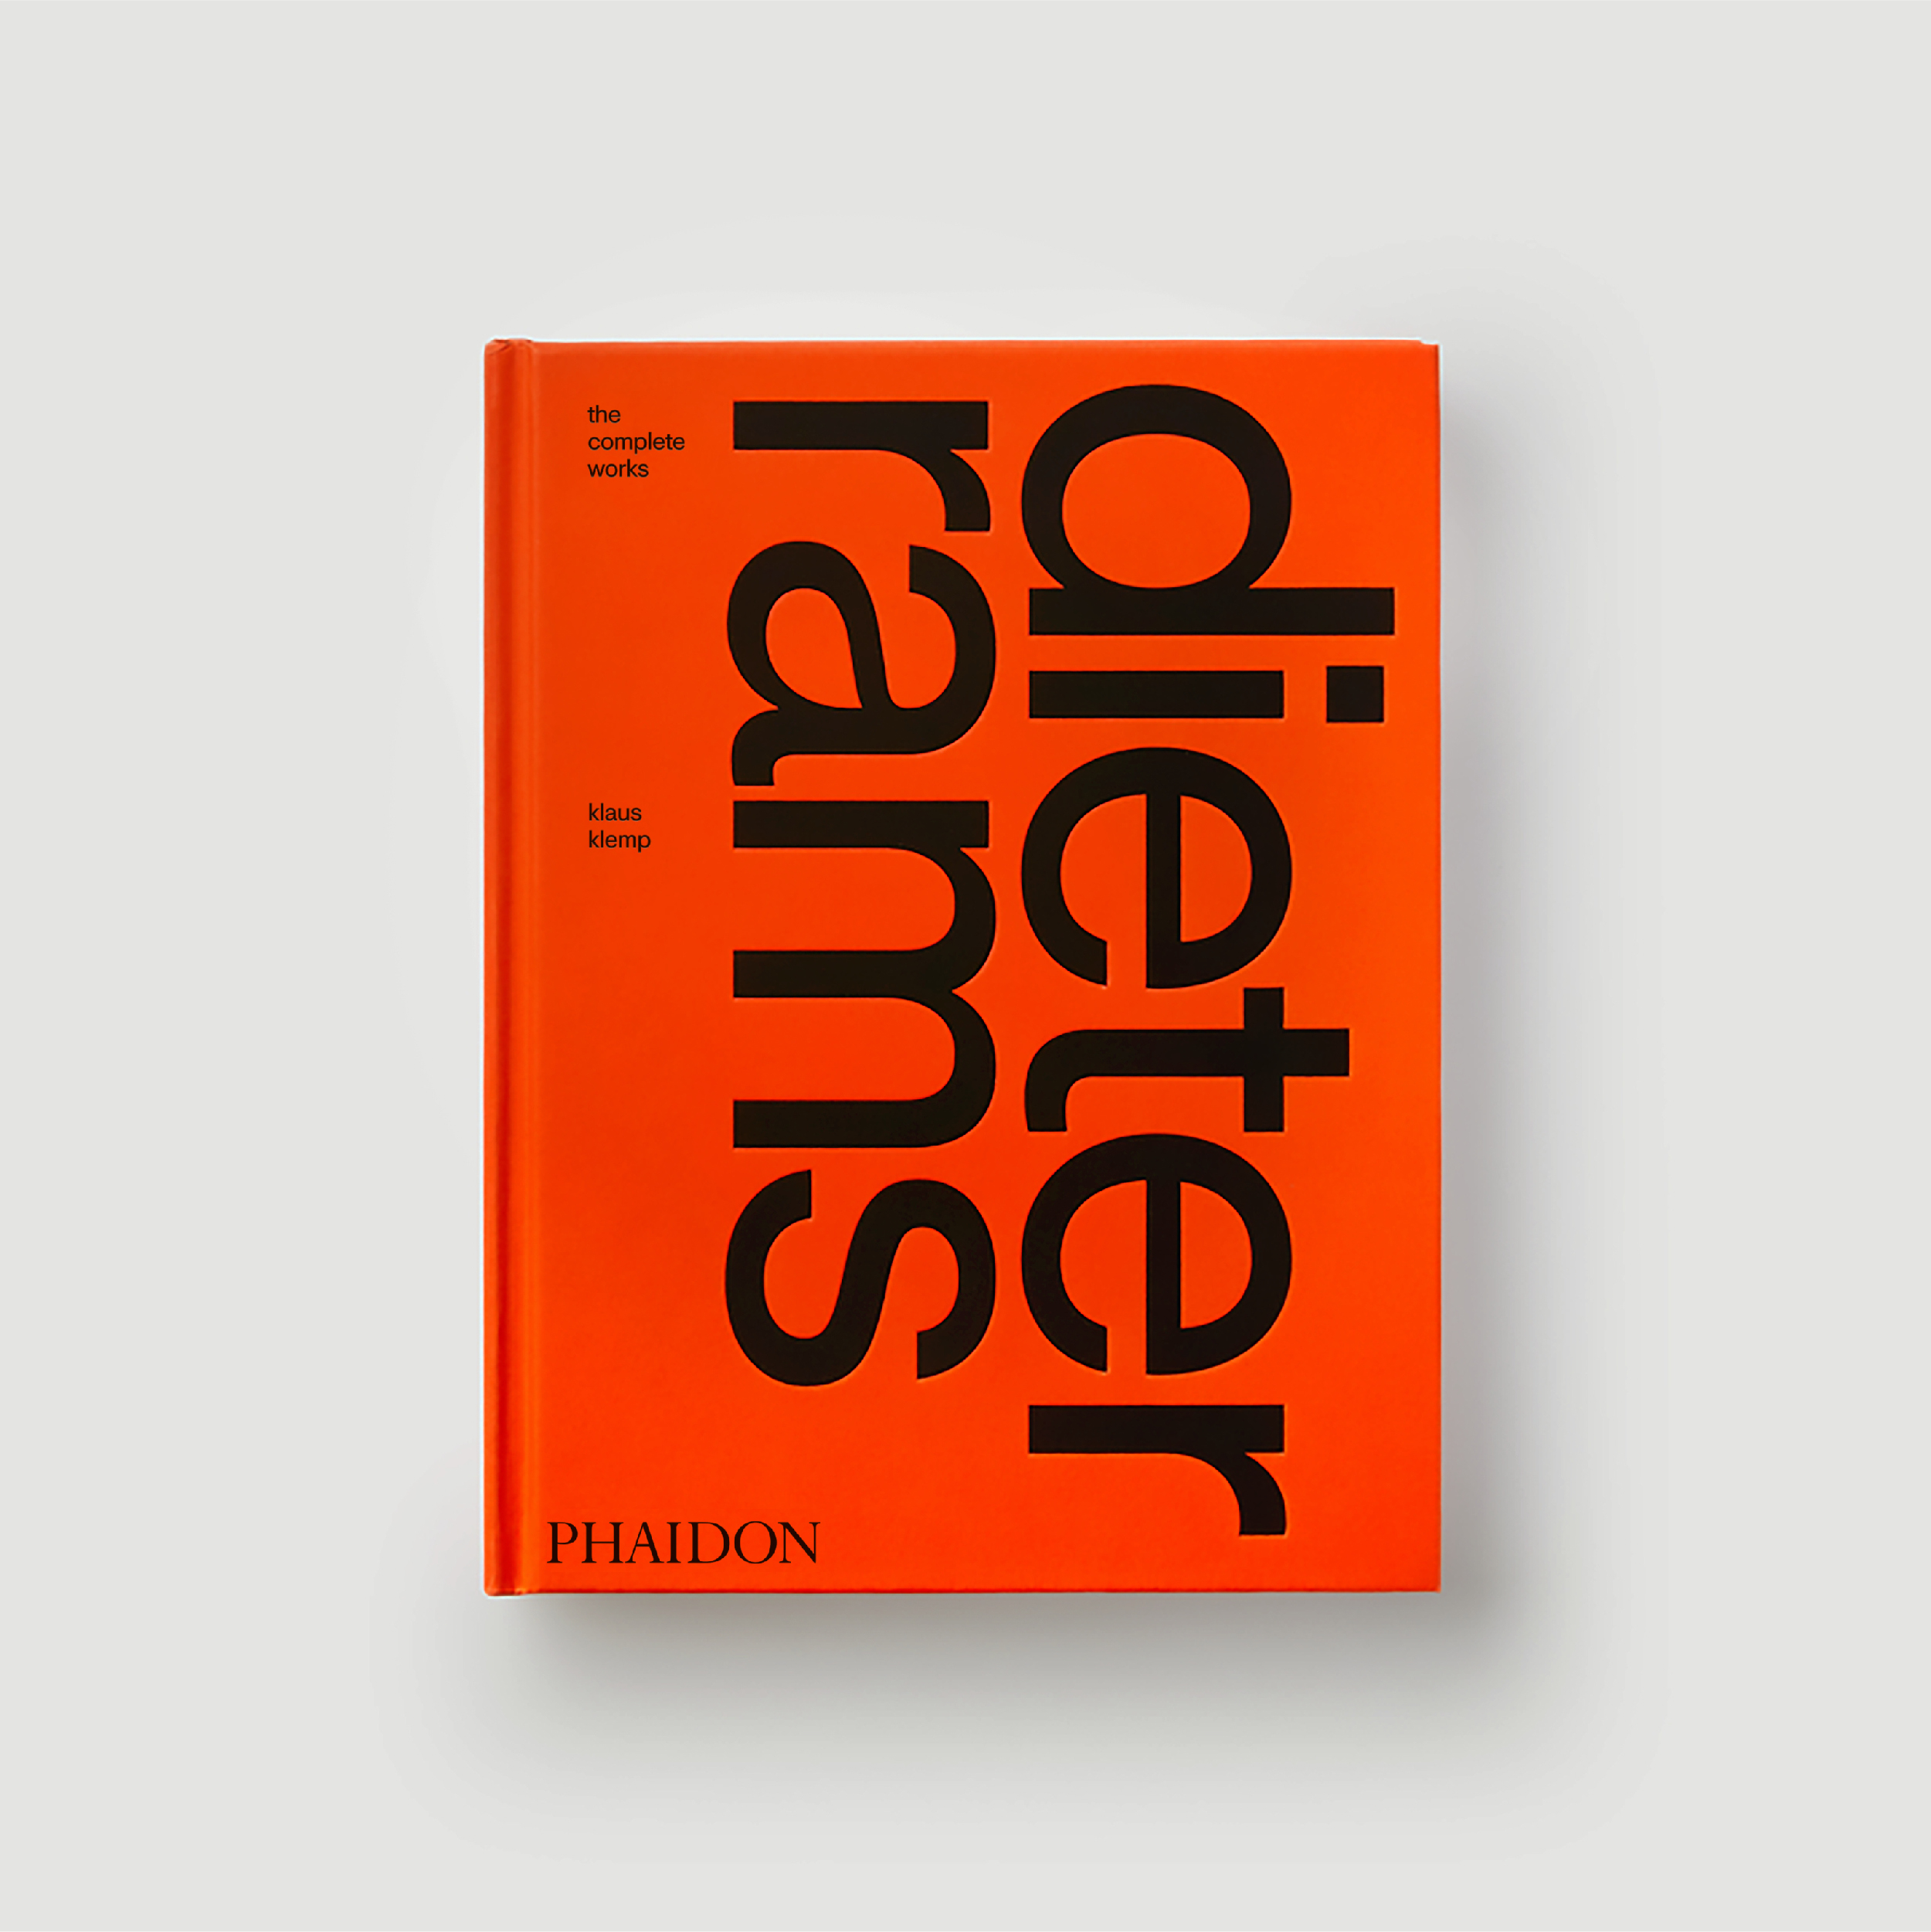 Order - Dieter Rams: The Complete Works